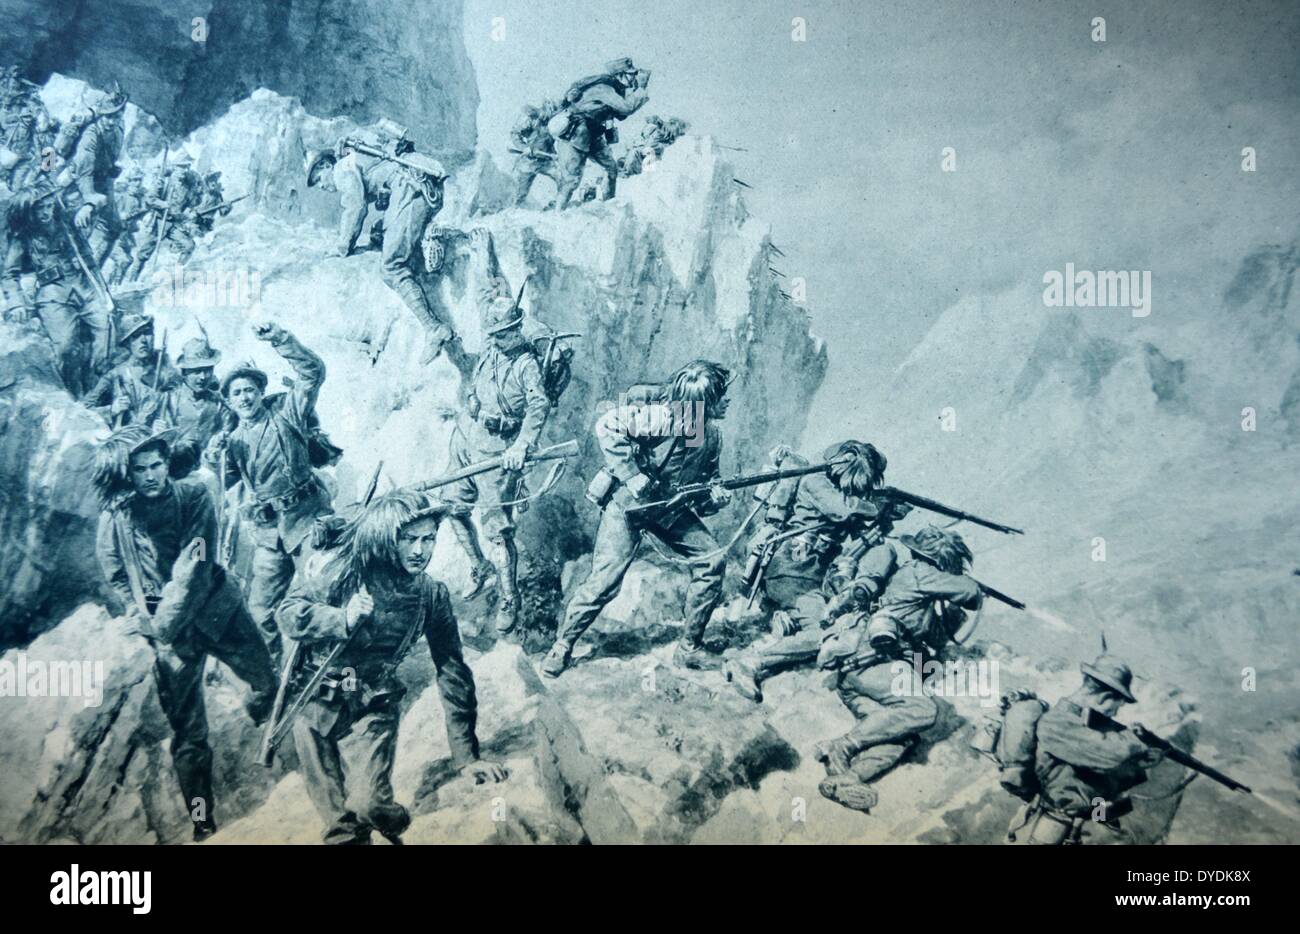 Trained mountaineers as well as soldiers - Italy's famous Alpine troops forcing a frontier pass in the Carnic Alps. World War One, 1915. Stock Photo